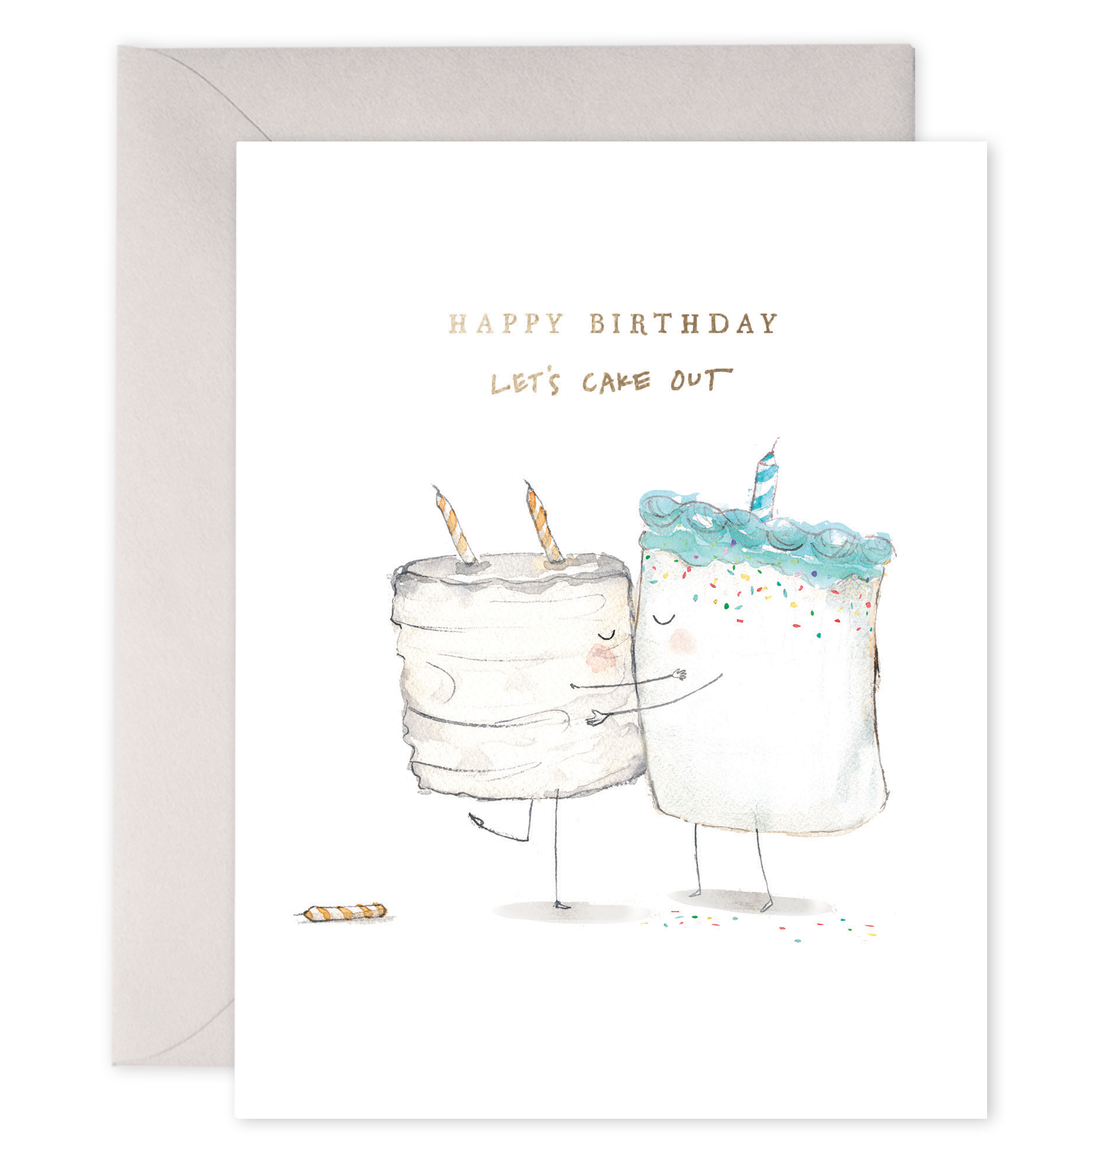 A happy birthday Cake Out Greeting Card with two marshmallows and a cake, made in the USA by E. Frances.